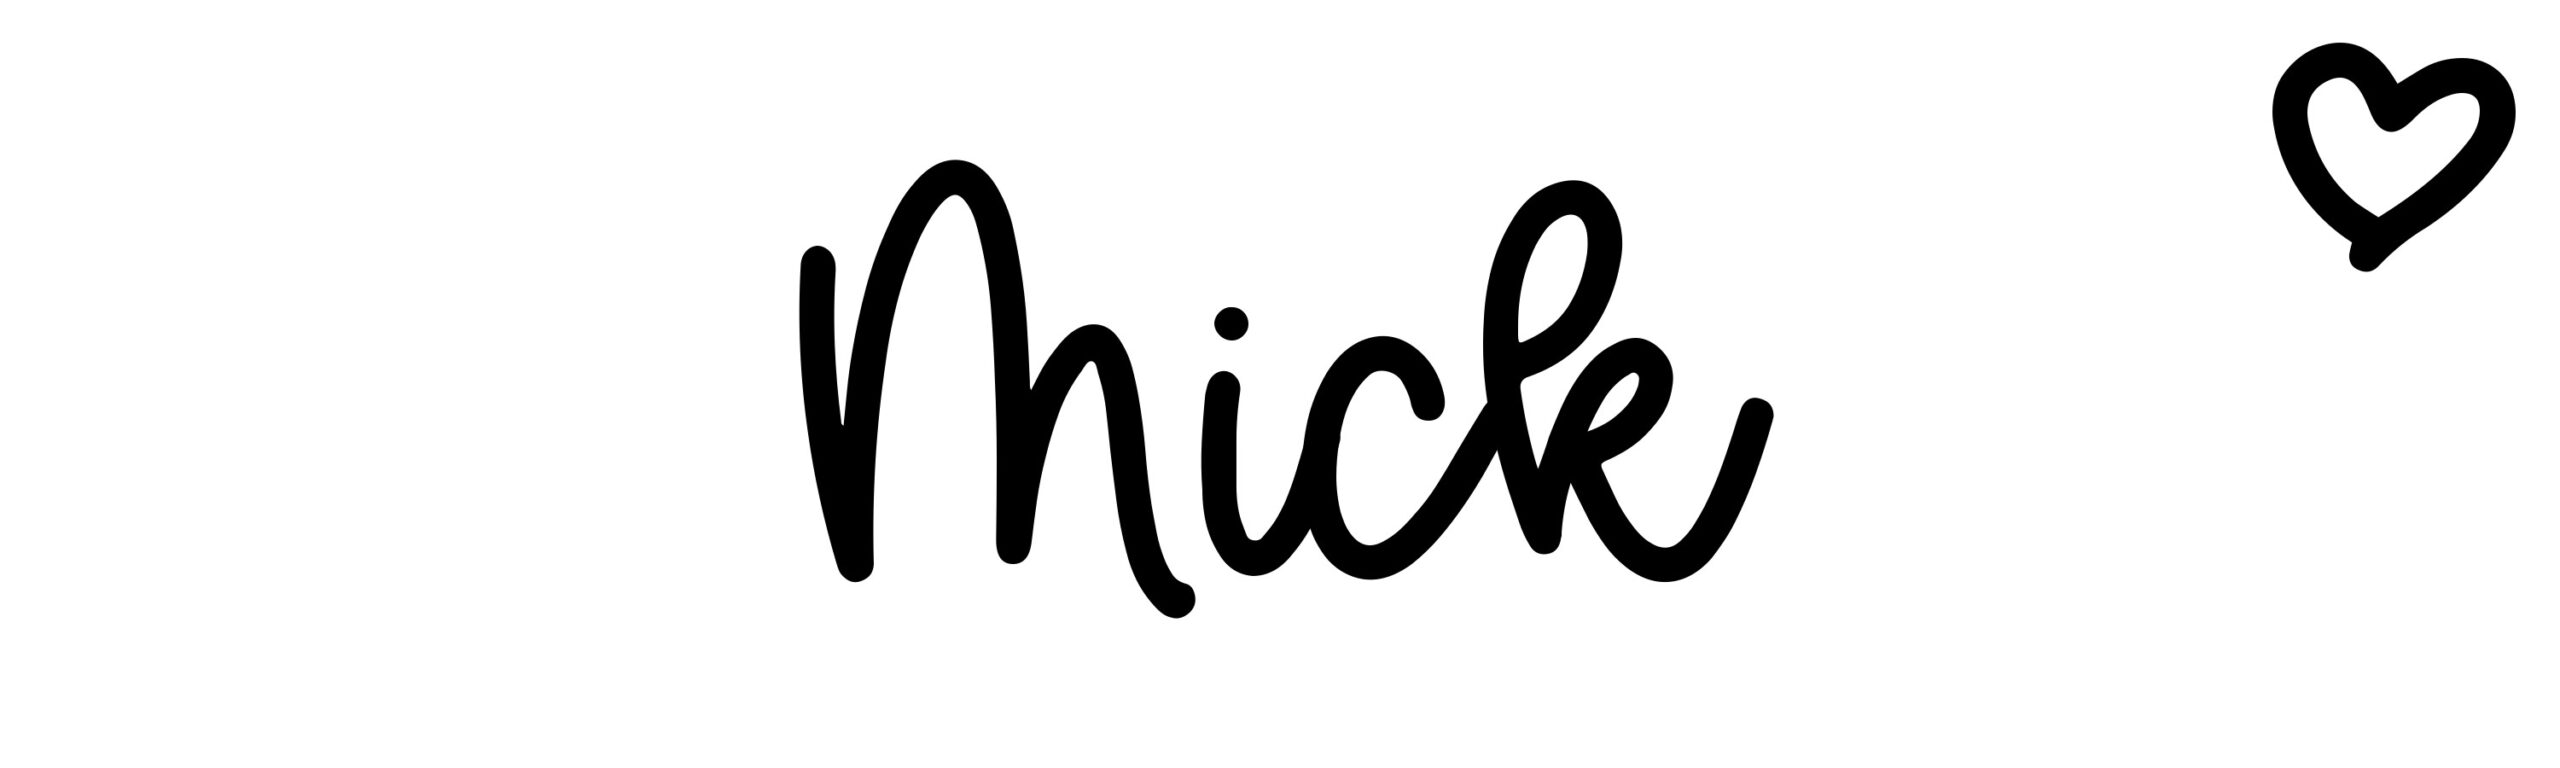 Mick - Name meaning, origin, variations and more